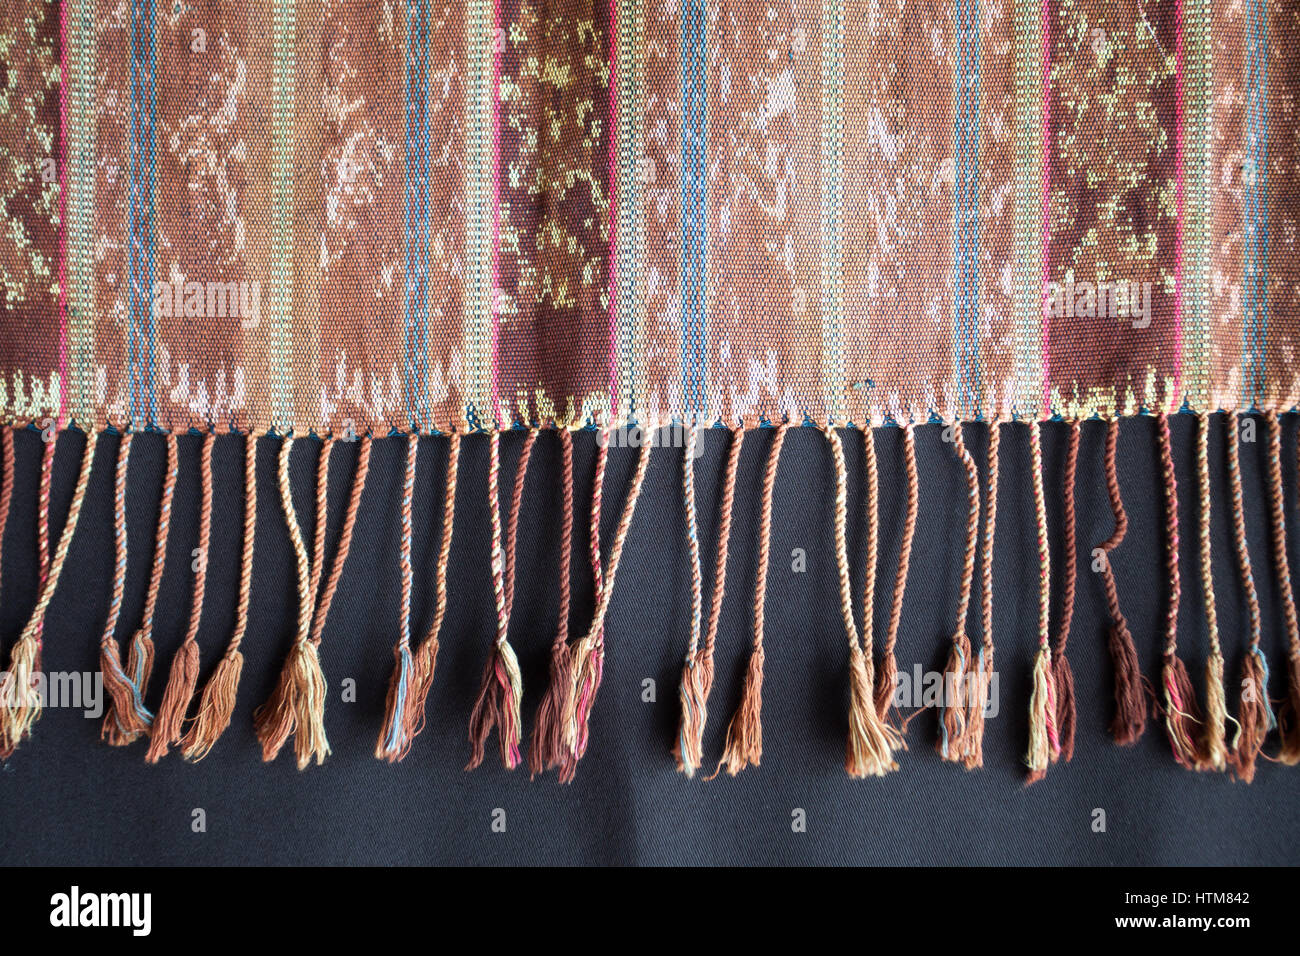 Traditional Indonesian and Asian pattern on fabric with brushes closeup and details Stock Photo